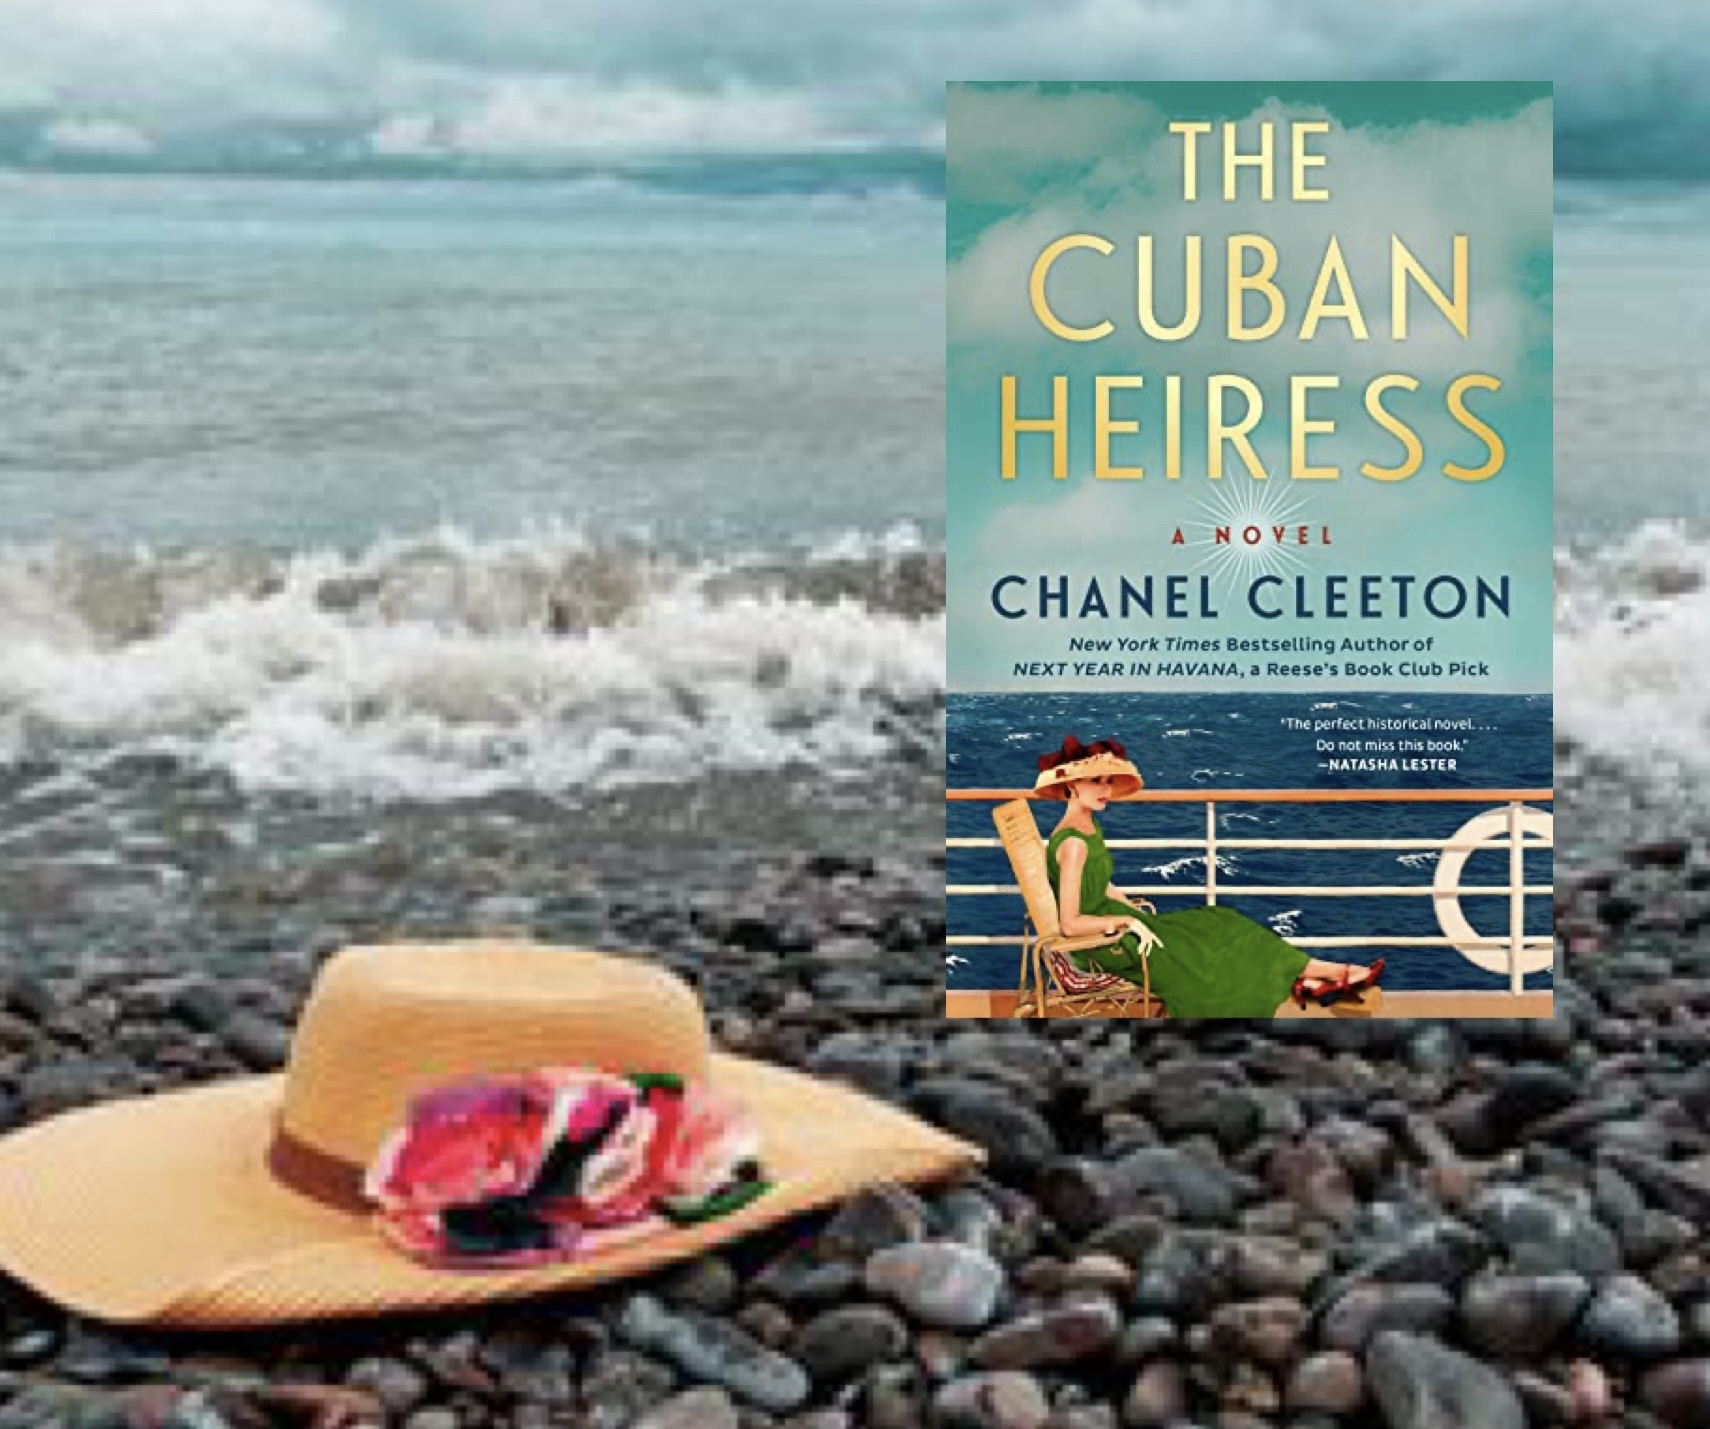 The Cuban Heiress by Chanel Cleeton #booktwitter #bookreview